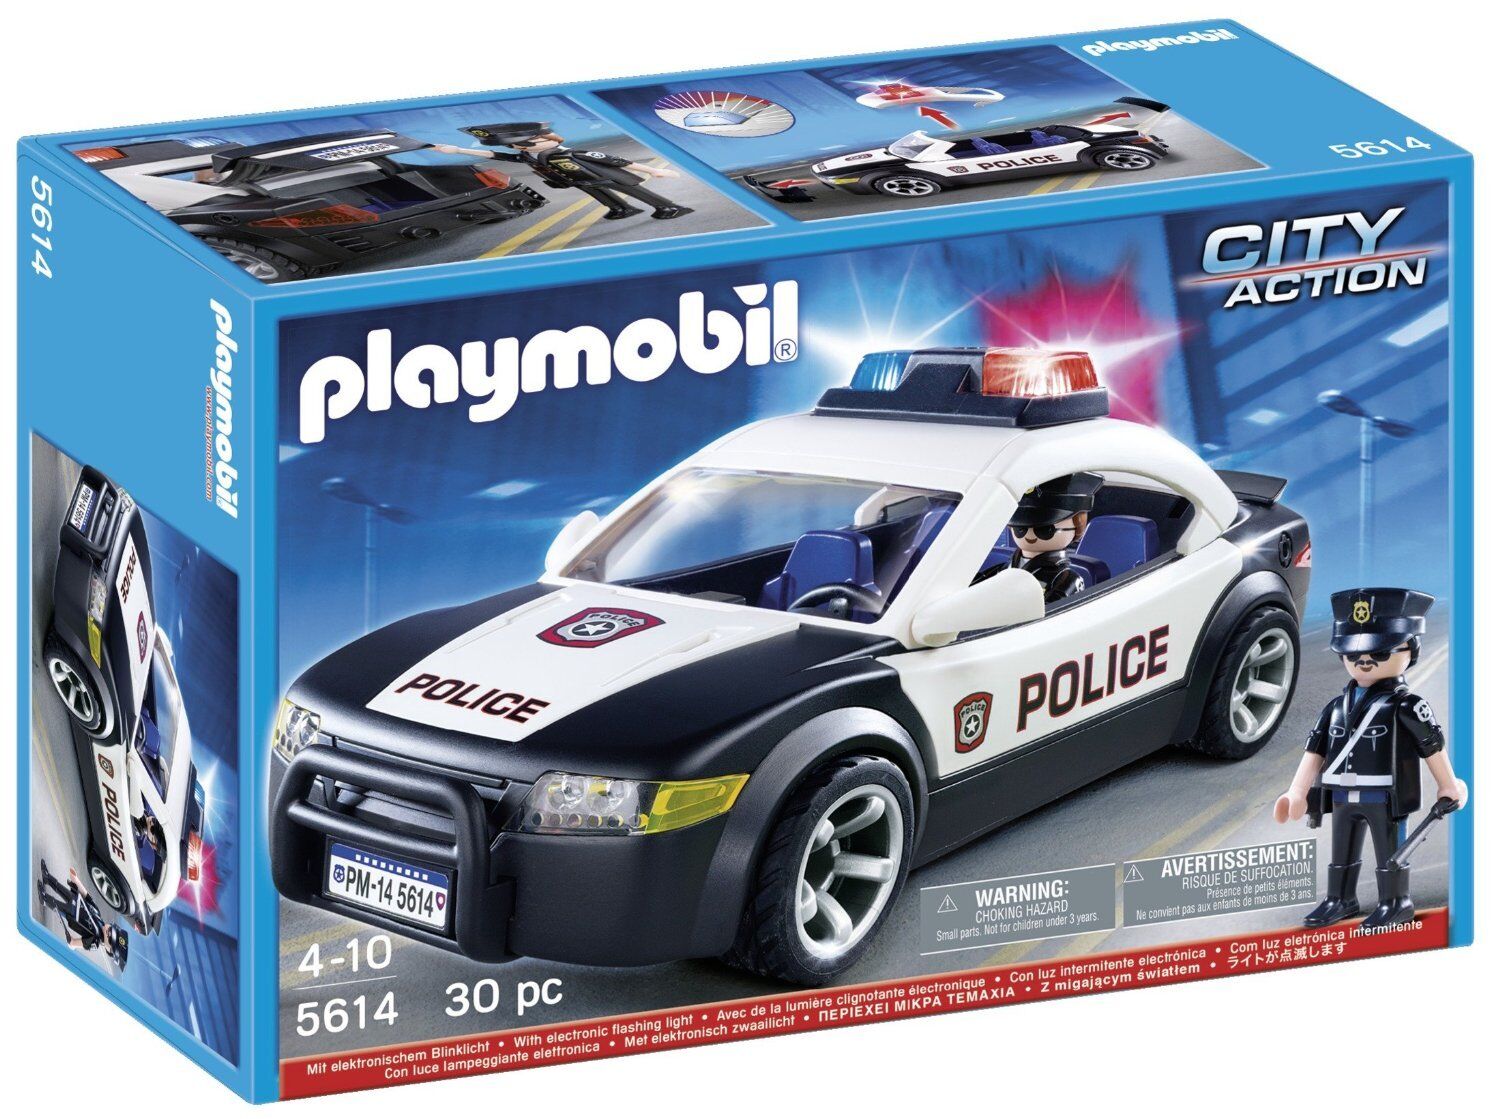 Playmobil City Action Set - Police/Ambulance/Speedboat/Truck/Jeep/Car - New |